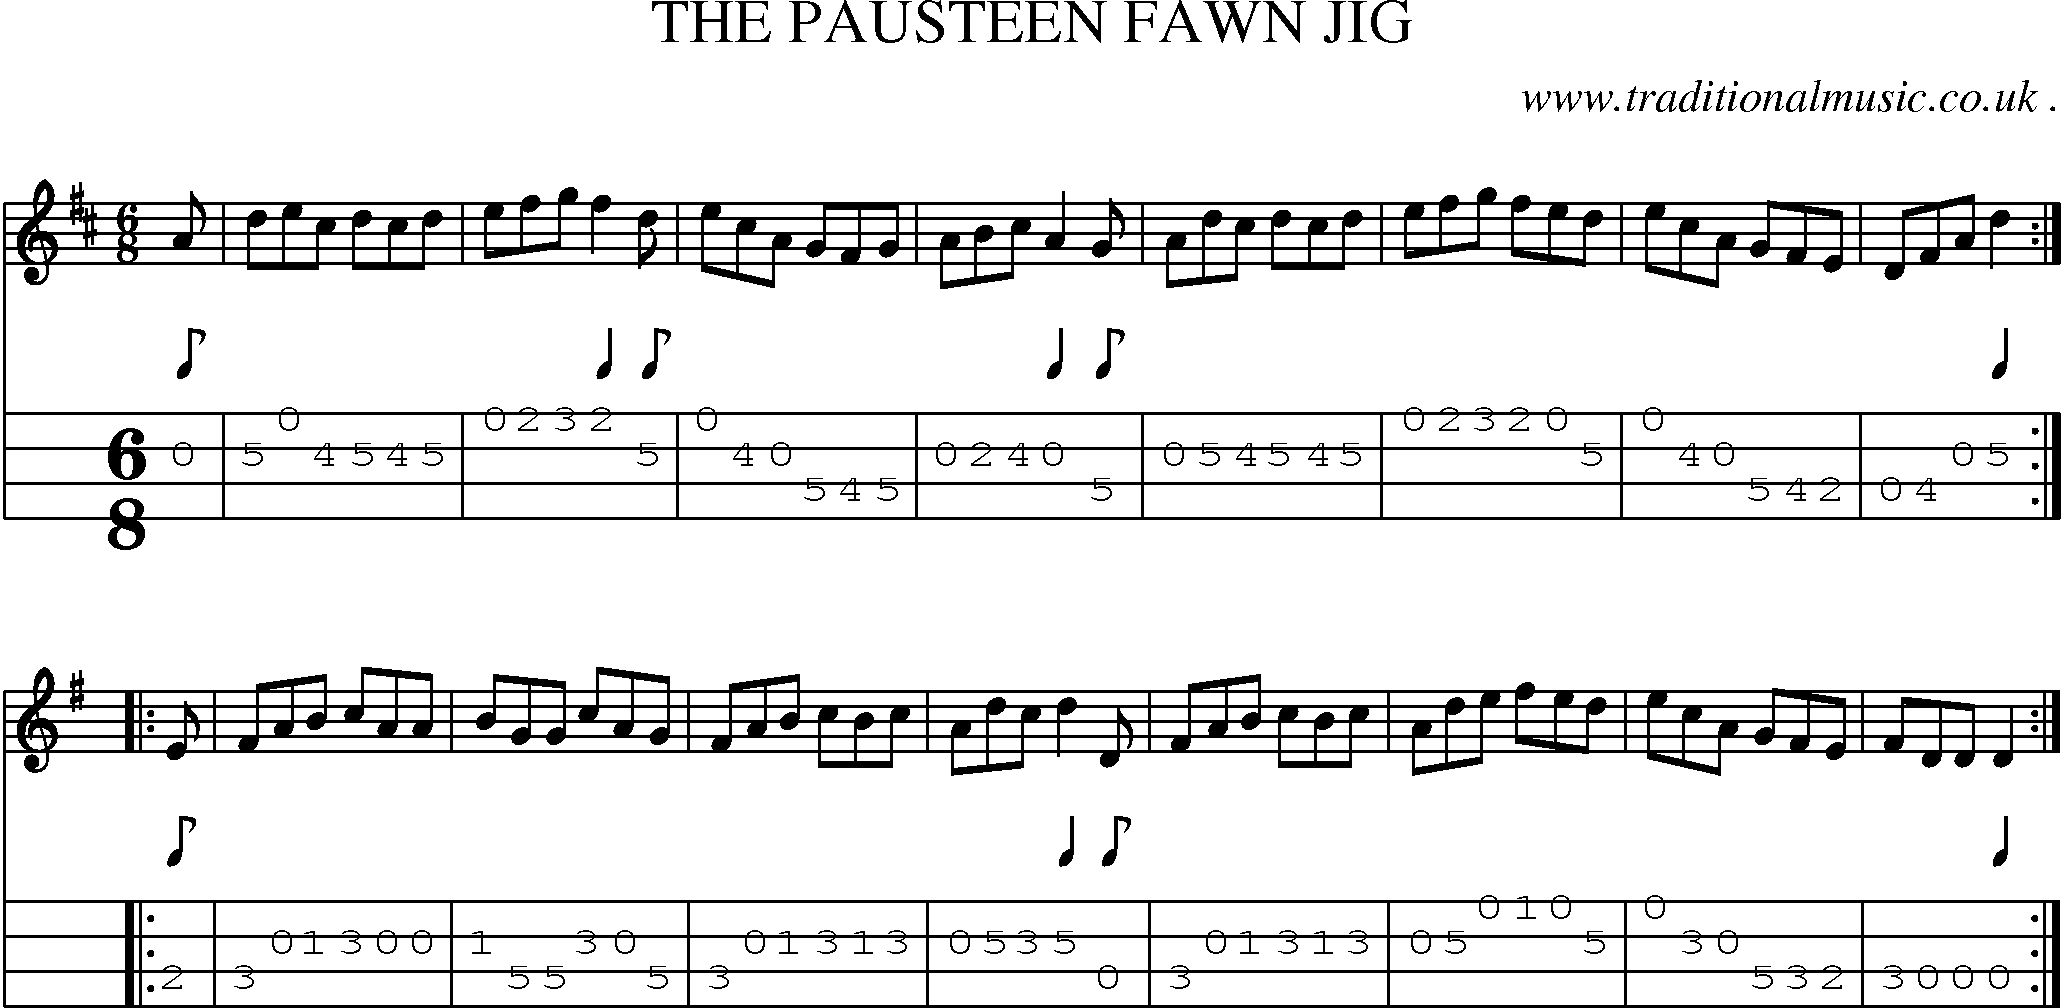 Sheet-Music and Mandolin Tabs for The Pausteen Fawn Jig